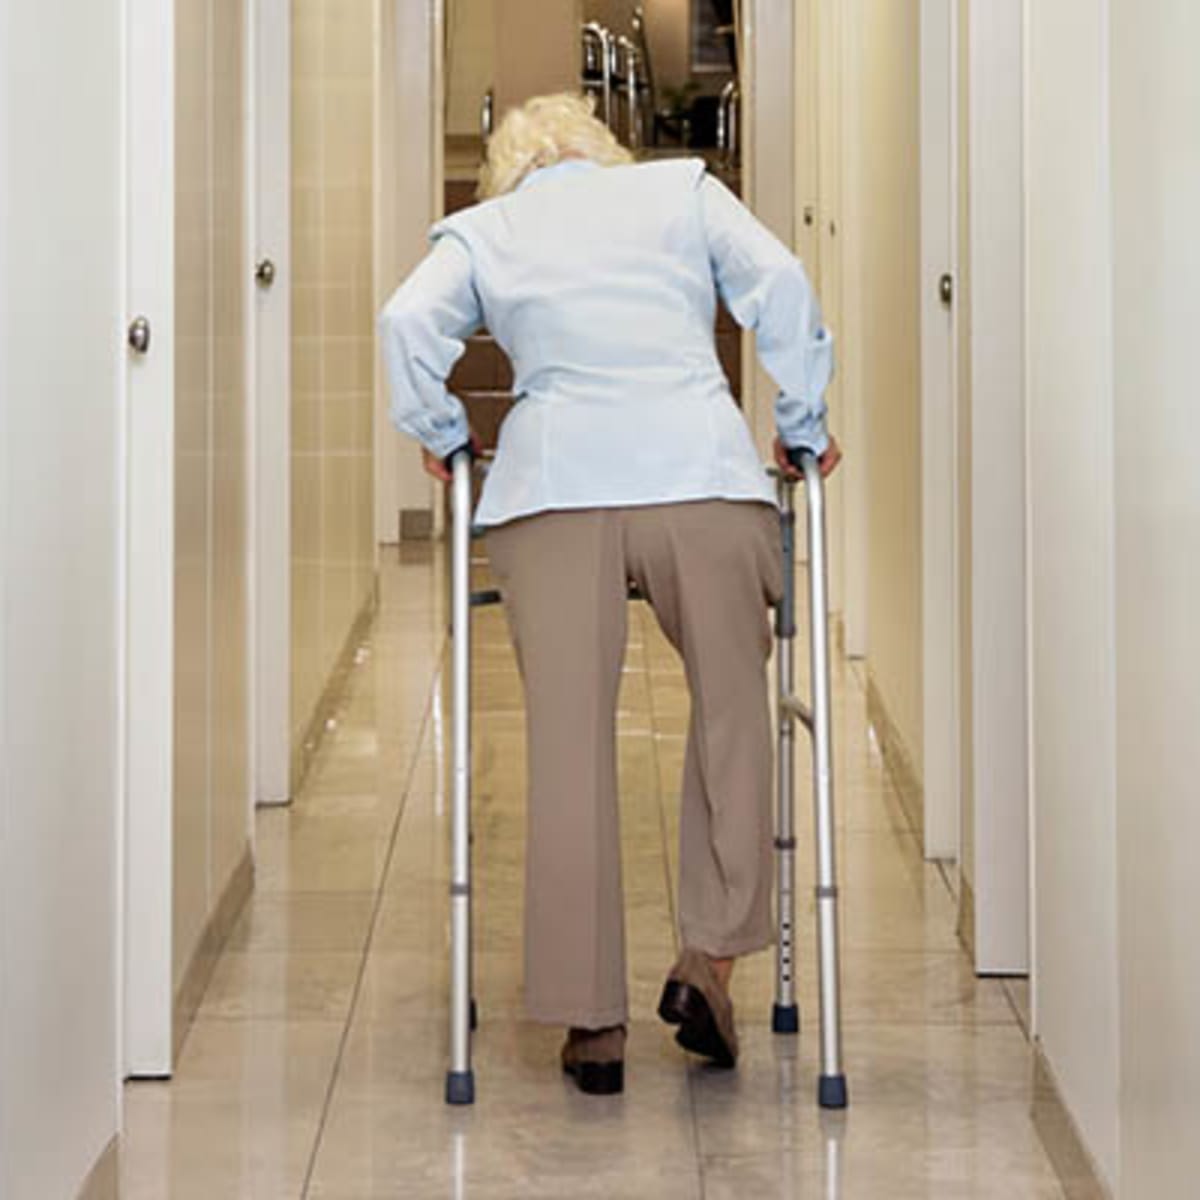 Full Time RNs in Assisted Living: Why It Matters - Laureate Group